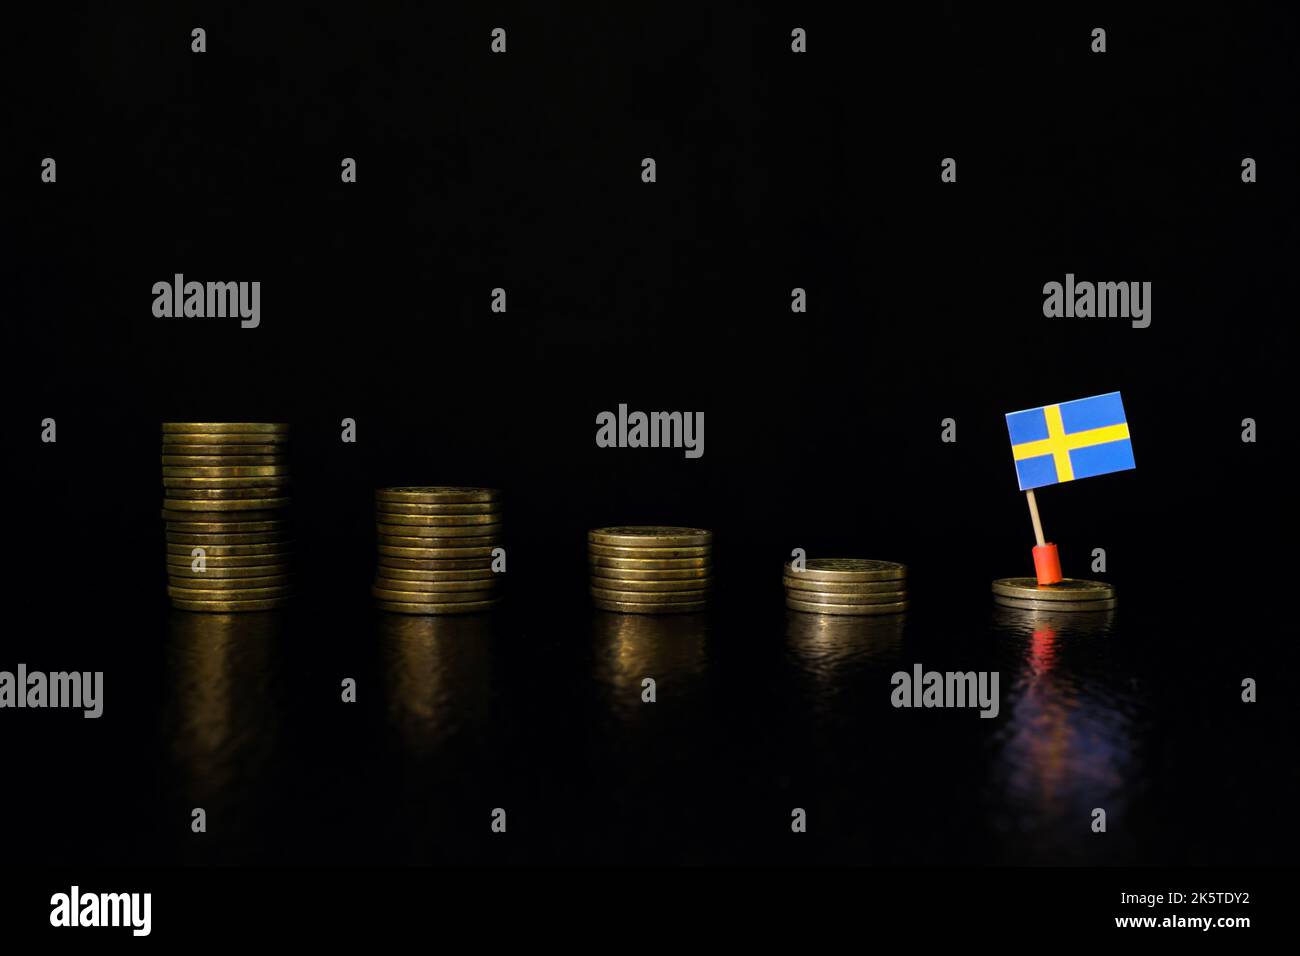 Sweden economic recession, financial crisis and currency depreciation concept. Swedish flag in decreasing stack of coins in dark black background. Stock Photo